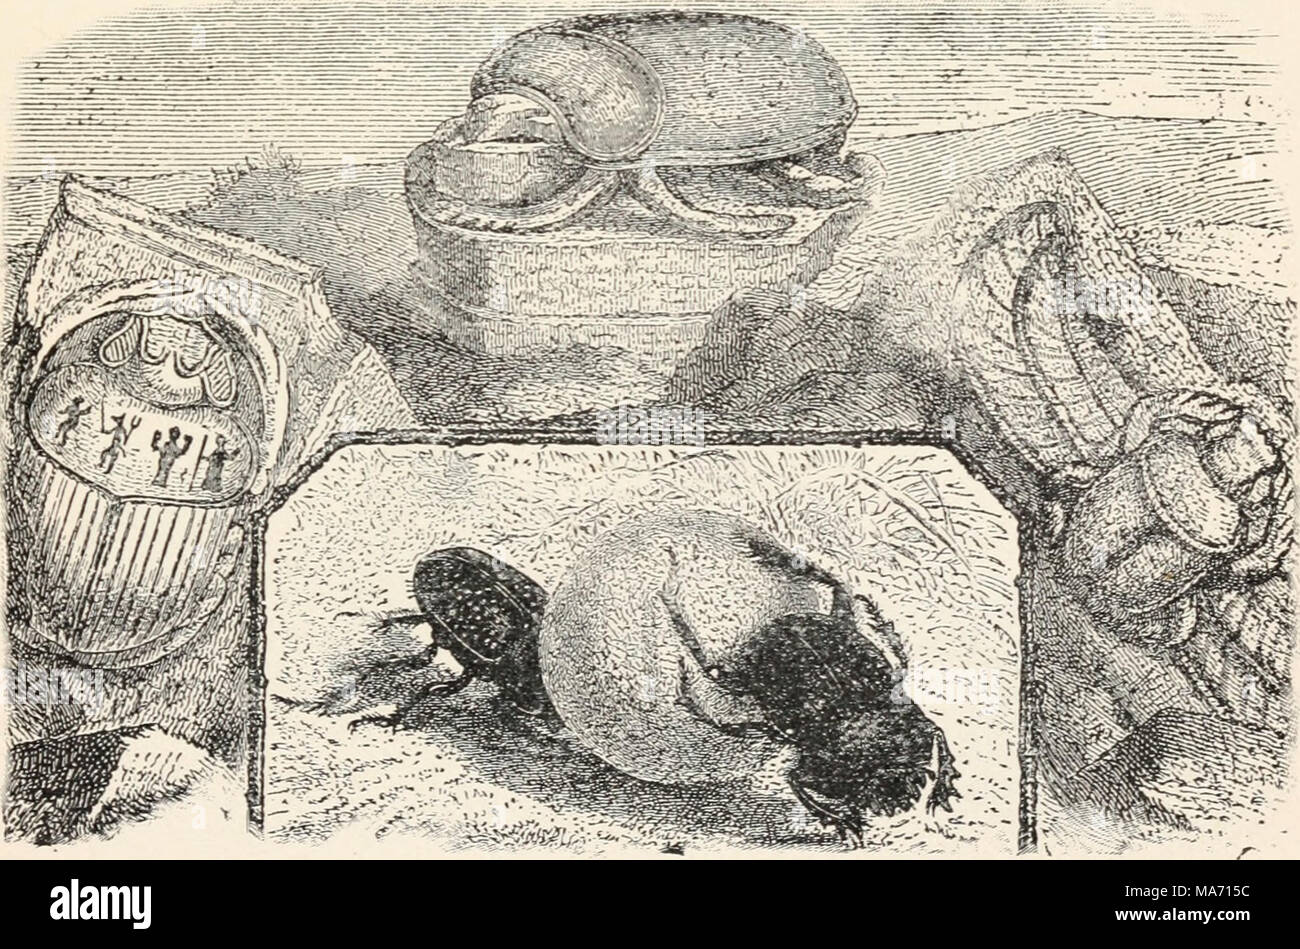 . Elementary entomology . FIG. 213. Scarab beetle (Aleiichus variolosus} rolling egg-balls of dung, and Egyptian sculptures of Sacred Scarab (After Brehm) Stock Photo